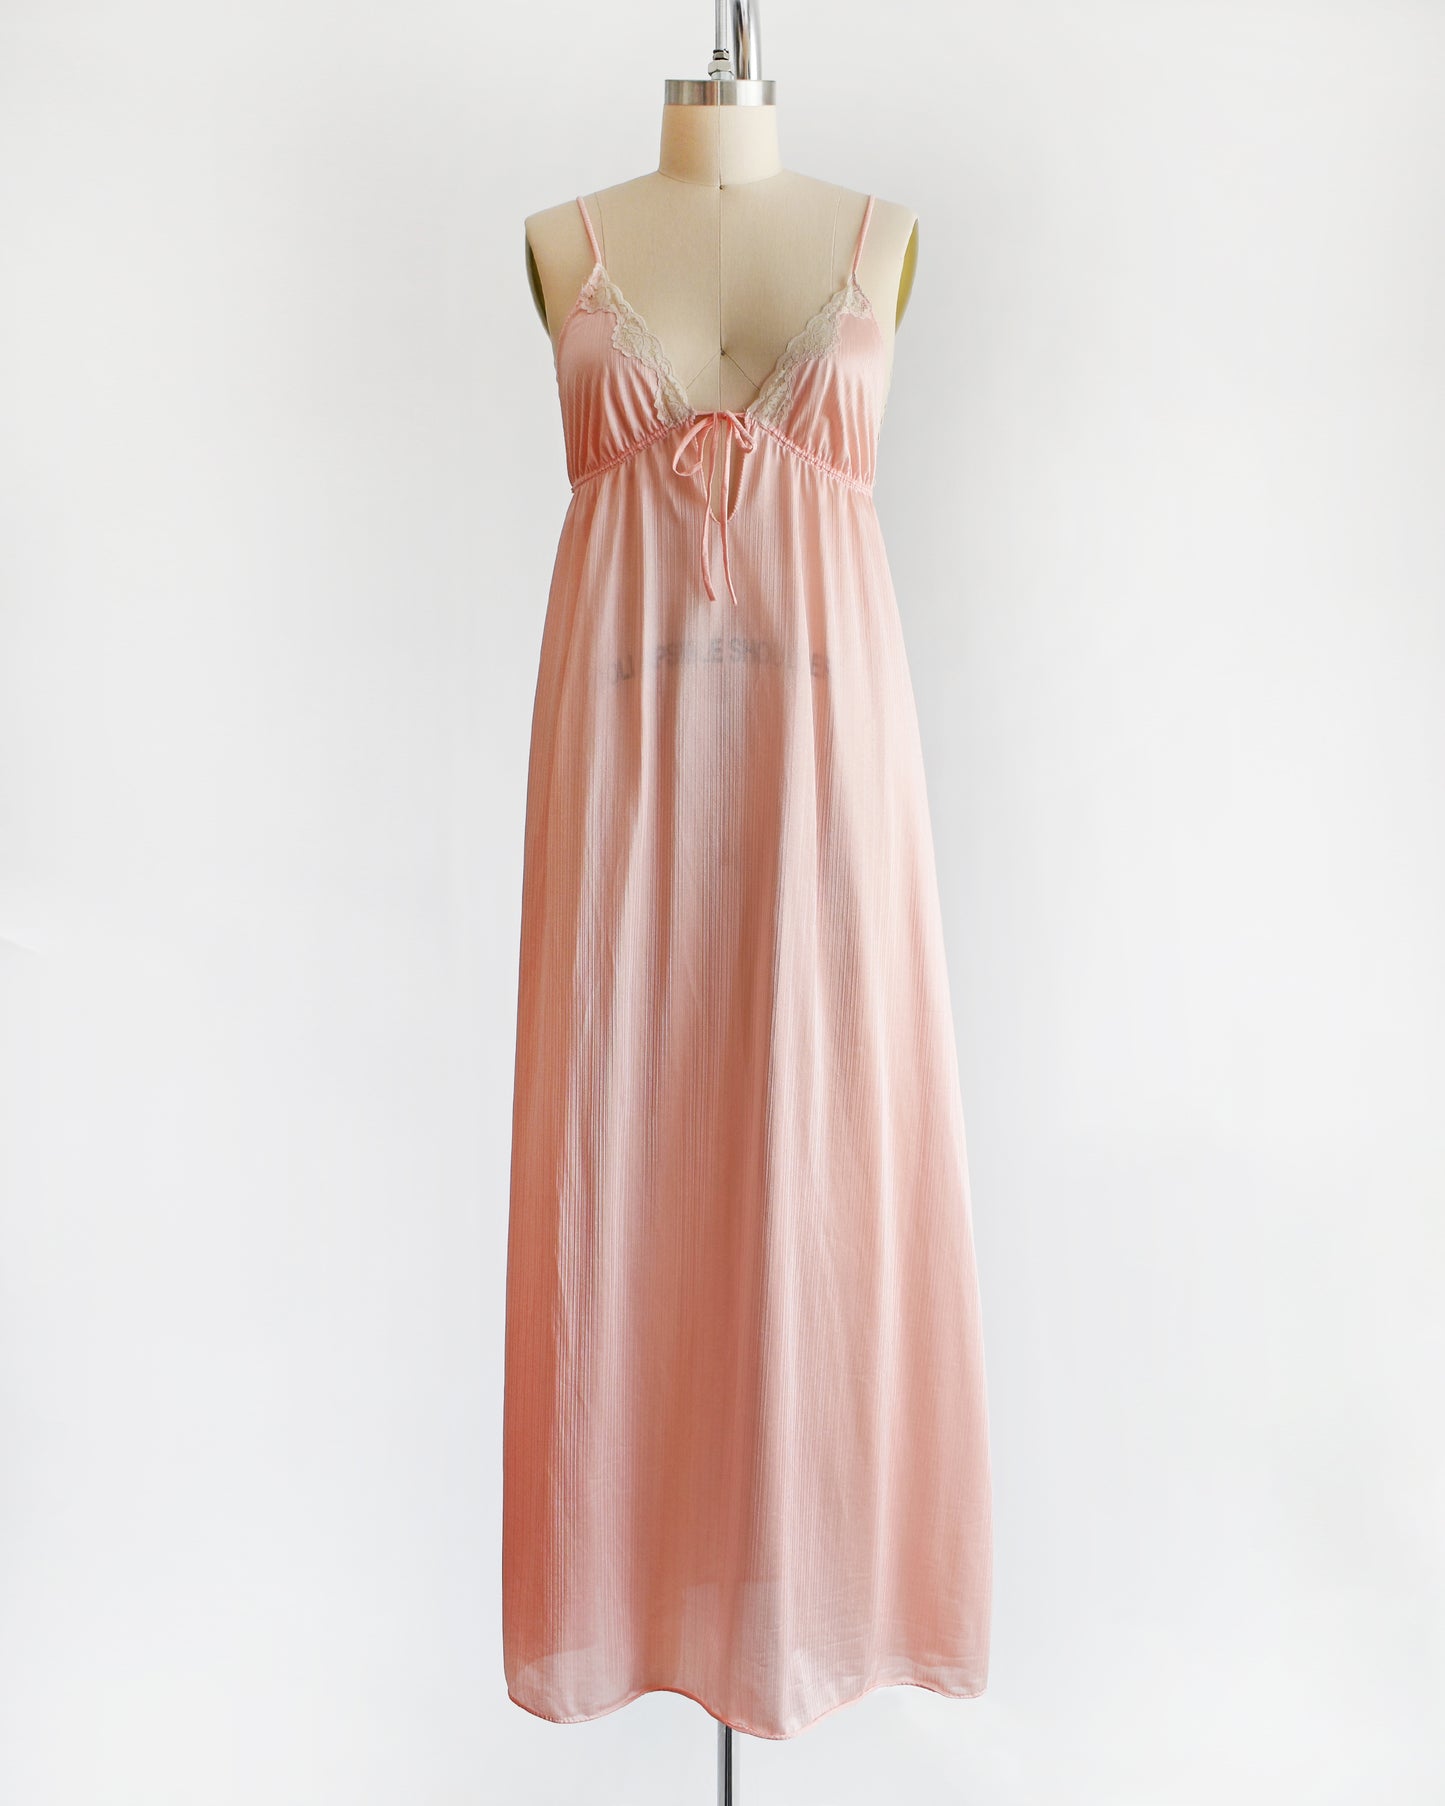 A vintage 1970s peachy pink nightgown that has lace trim on the bodice